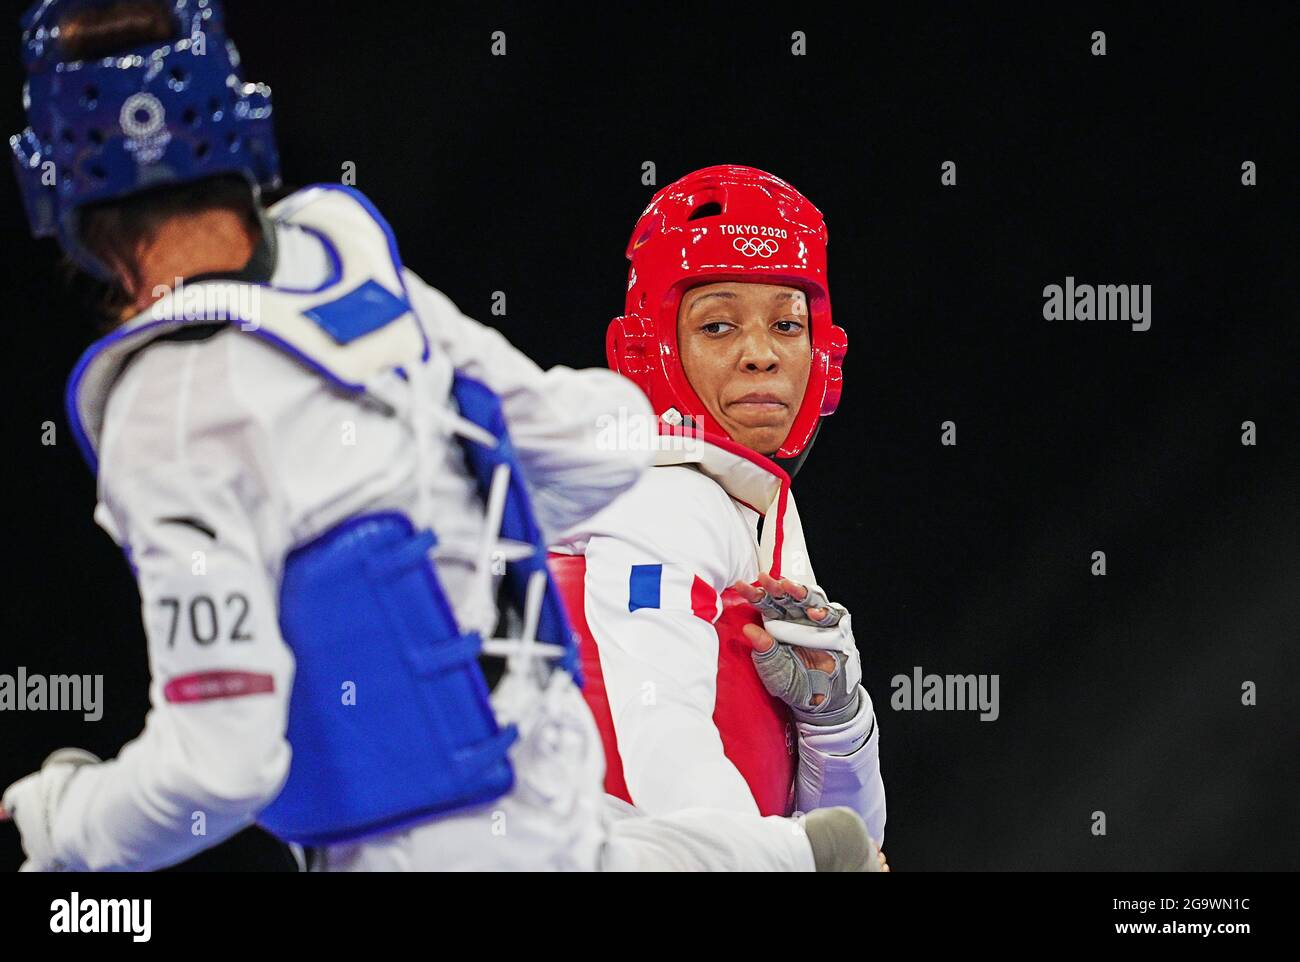 July 27, 2021: Althea Laurin from France and Shuying Zheng from China during Taekwondo at the Tokyo Olympics at Makuhari Messe Hall A, Tokyo, Japan. Kim Price/CSM Stock Photo